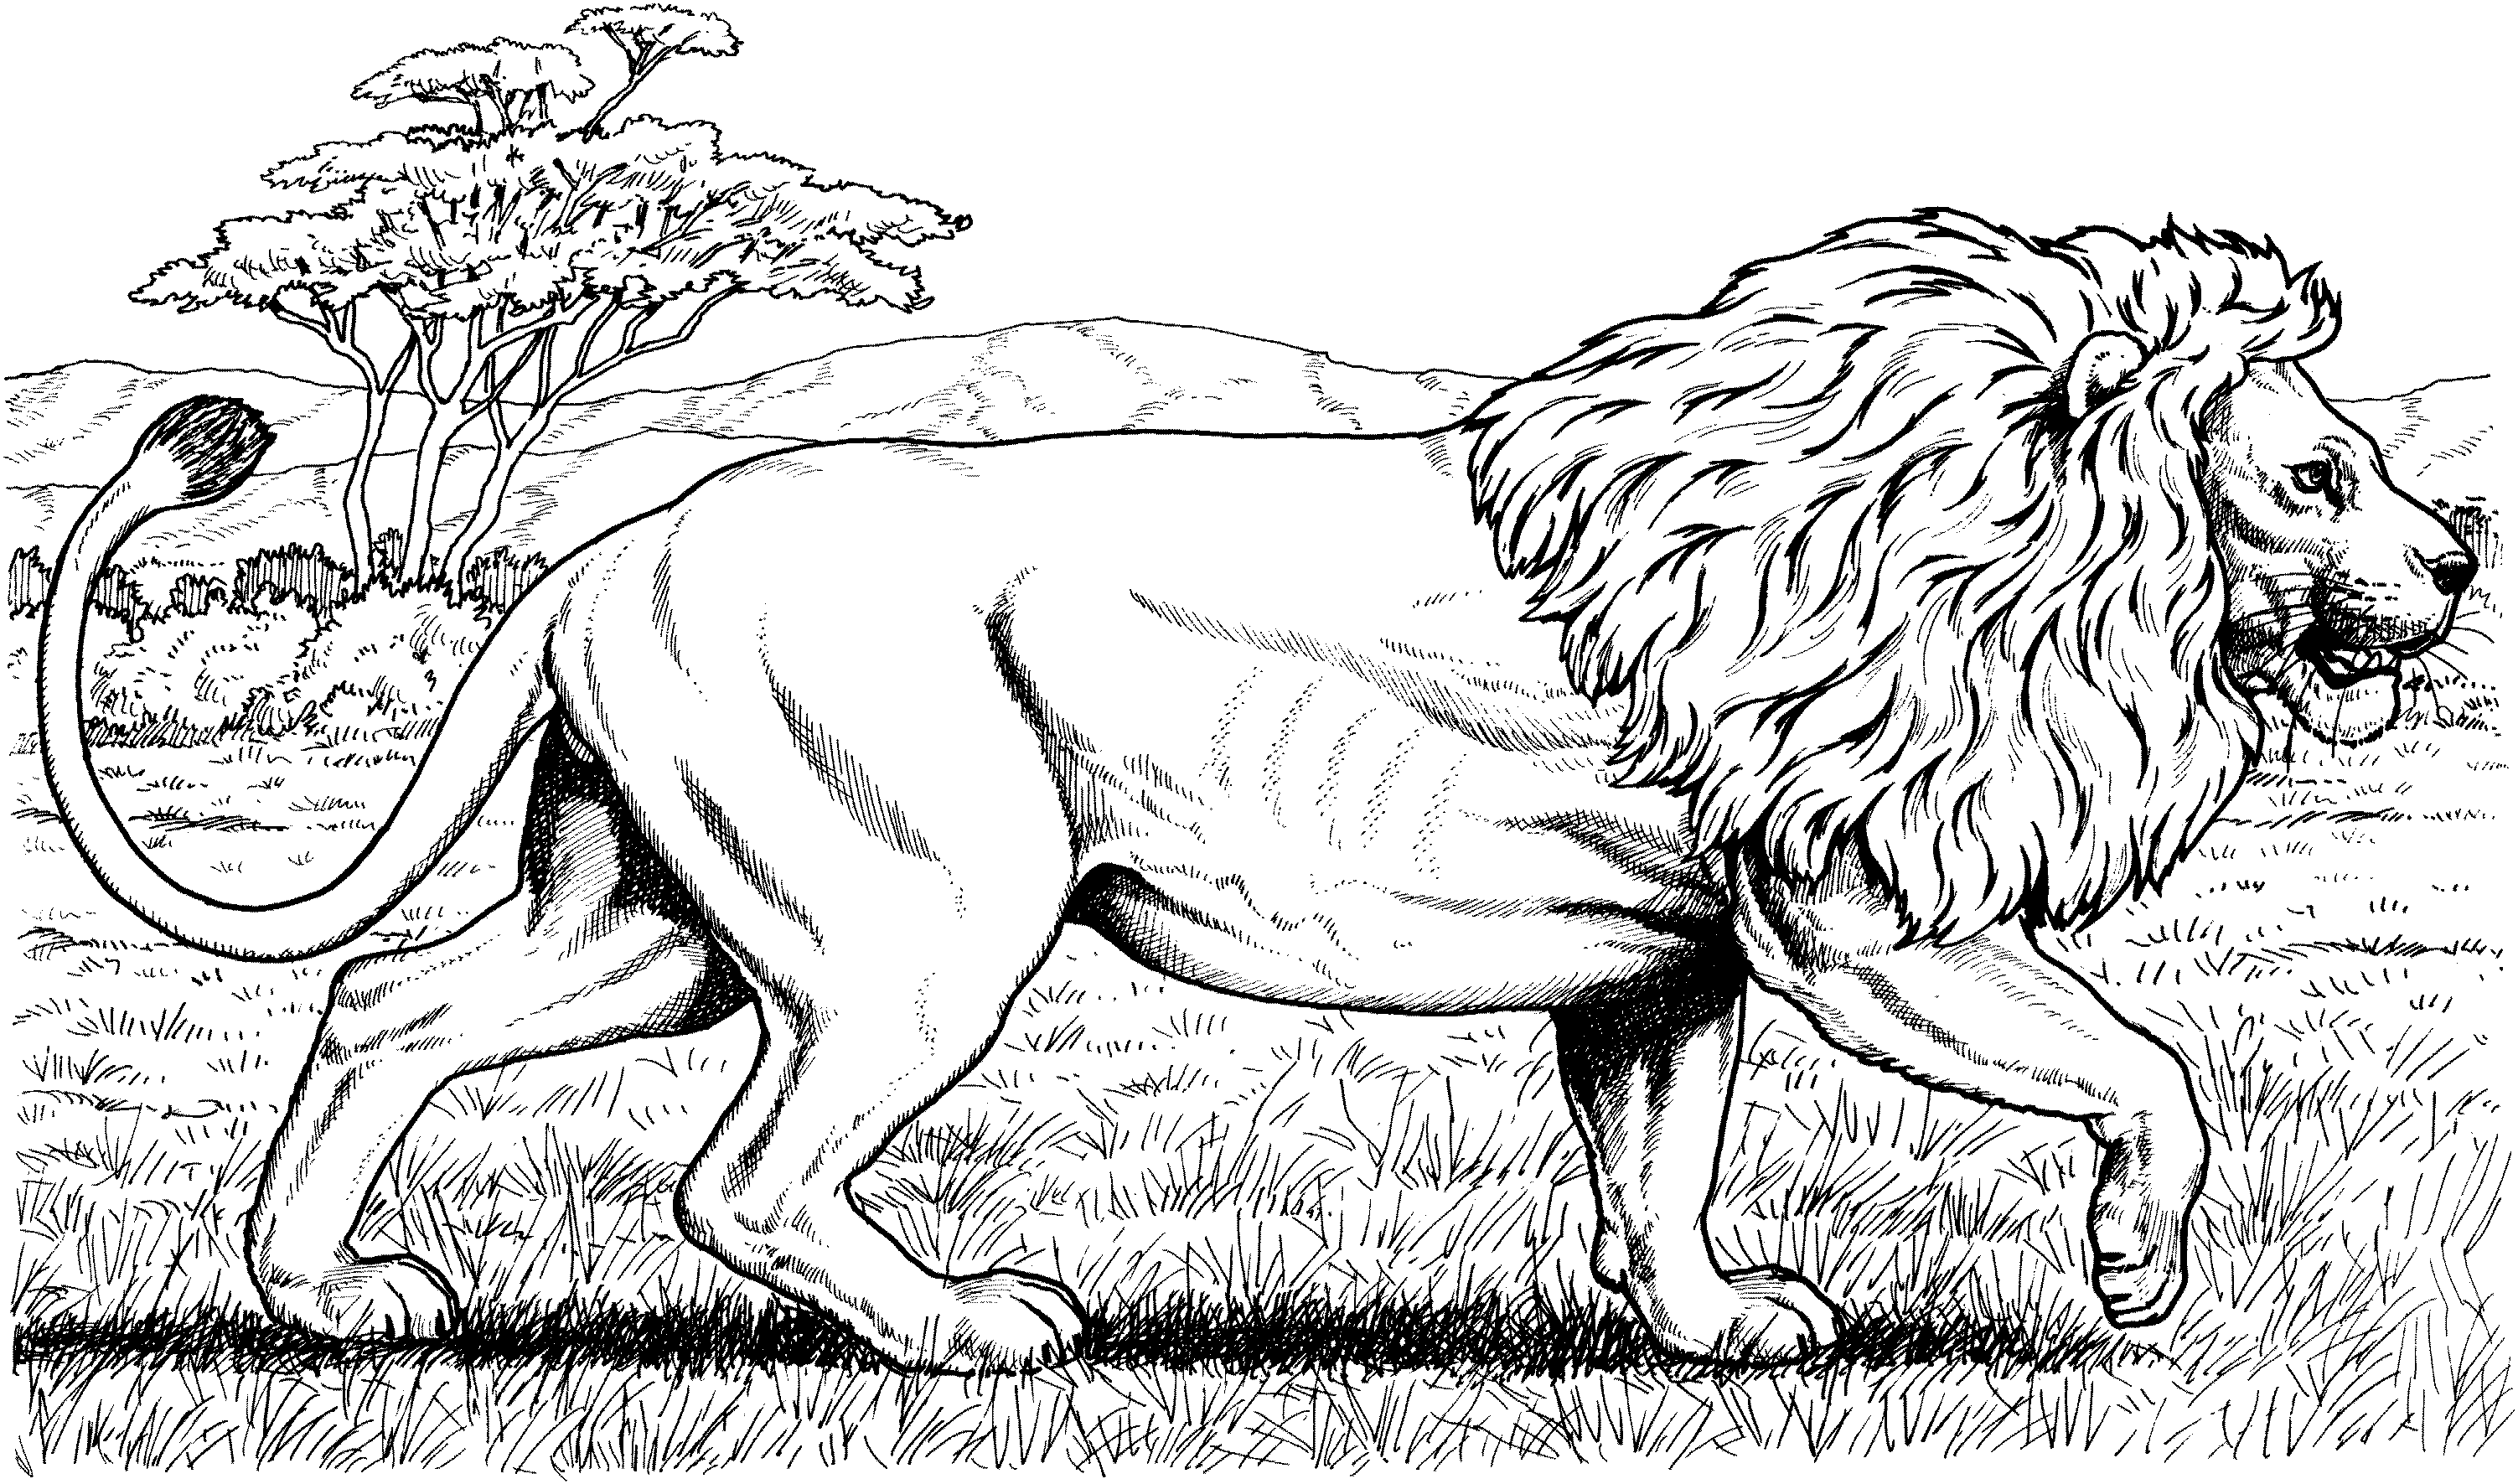 Lion coloring pages for adults free lion coloring pages lion coloring pages animal coloring pages cat coloring page